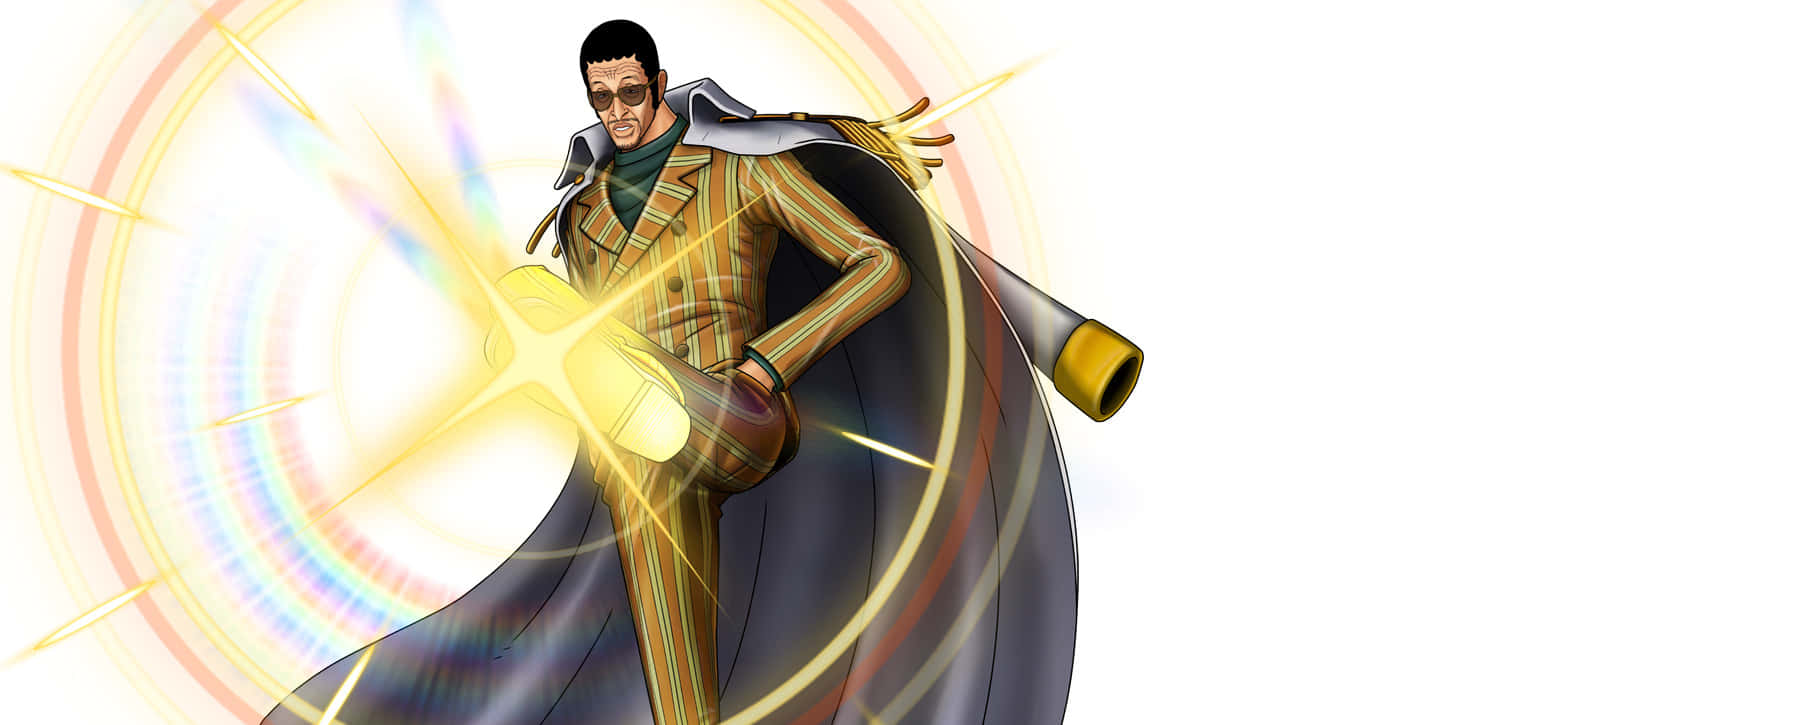 Caption: Kizaru in Action: A dazzling display of light and power Wallpaper